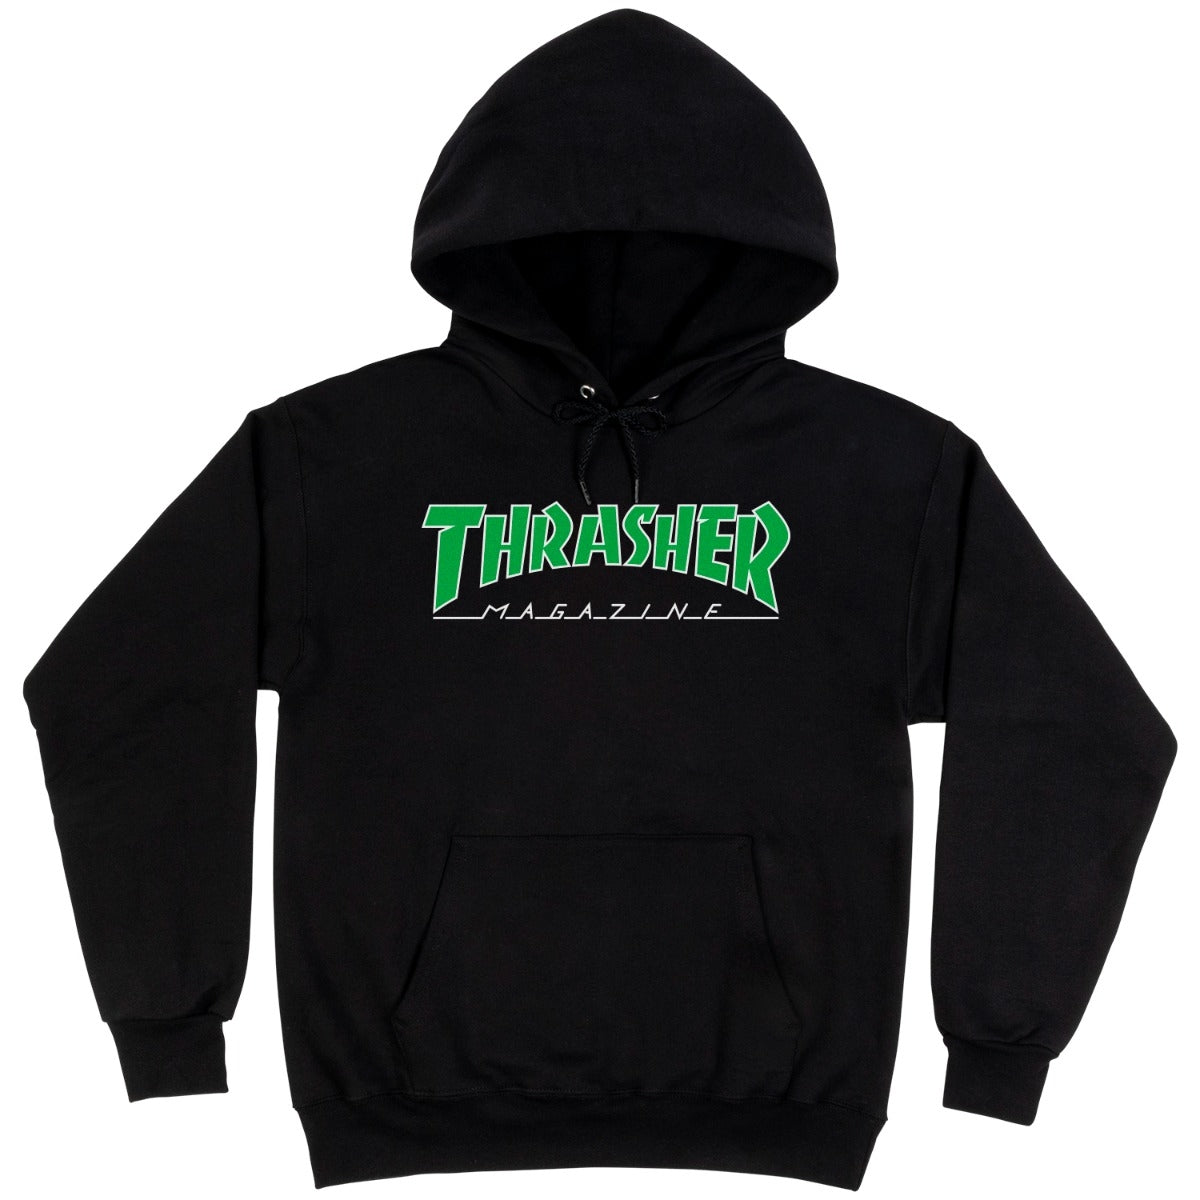 Thrasher Outlined Hoodie - Black/Green